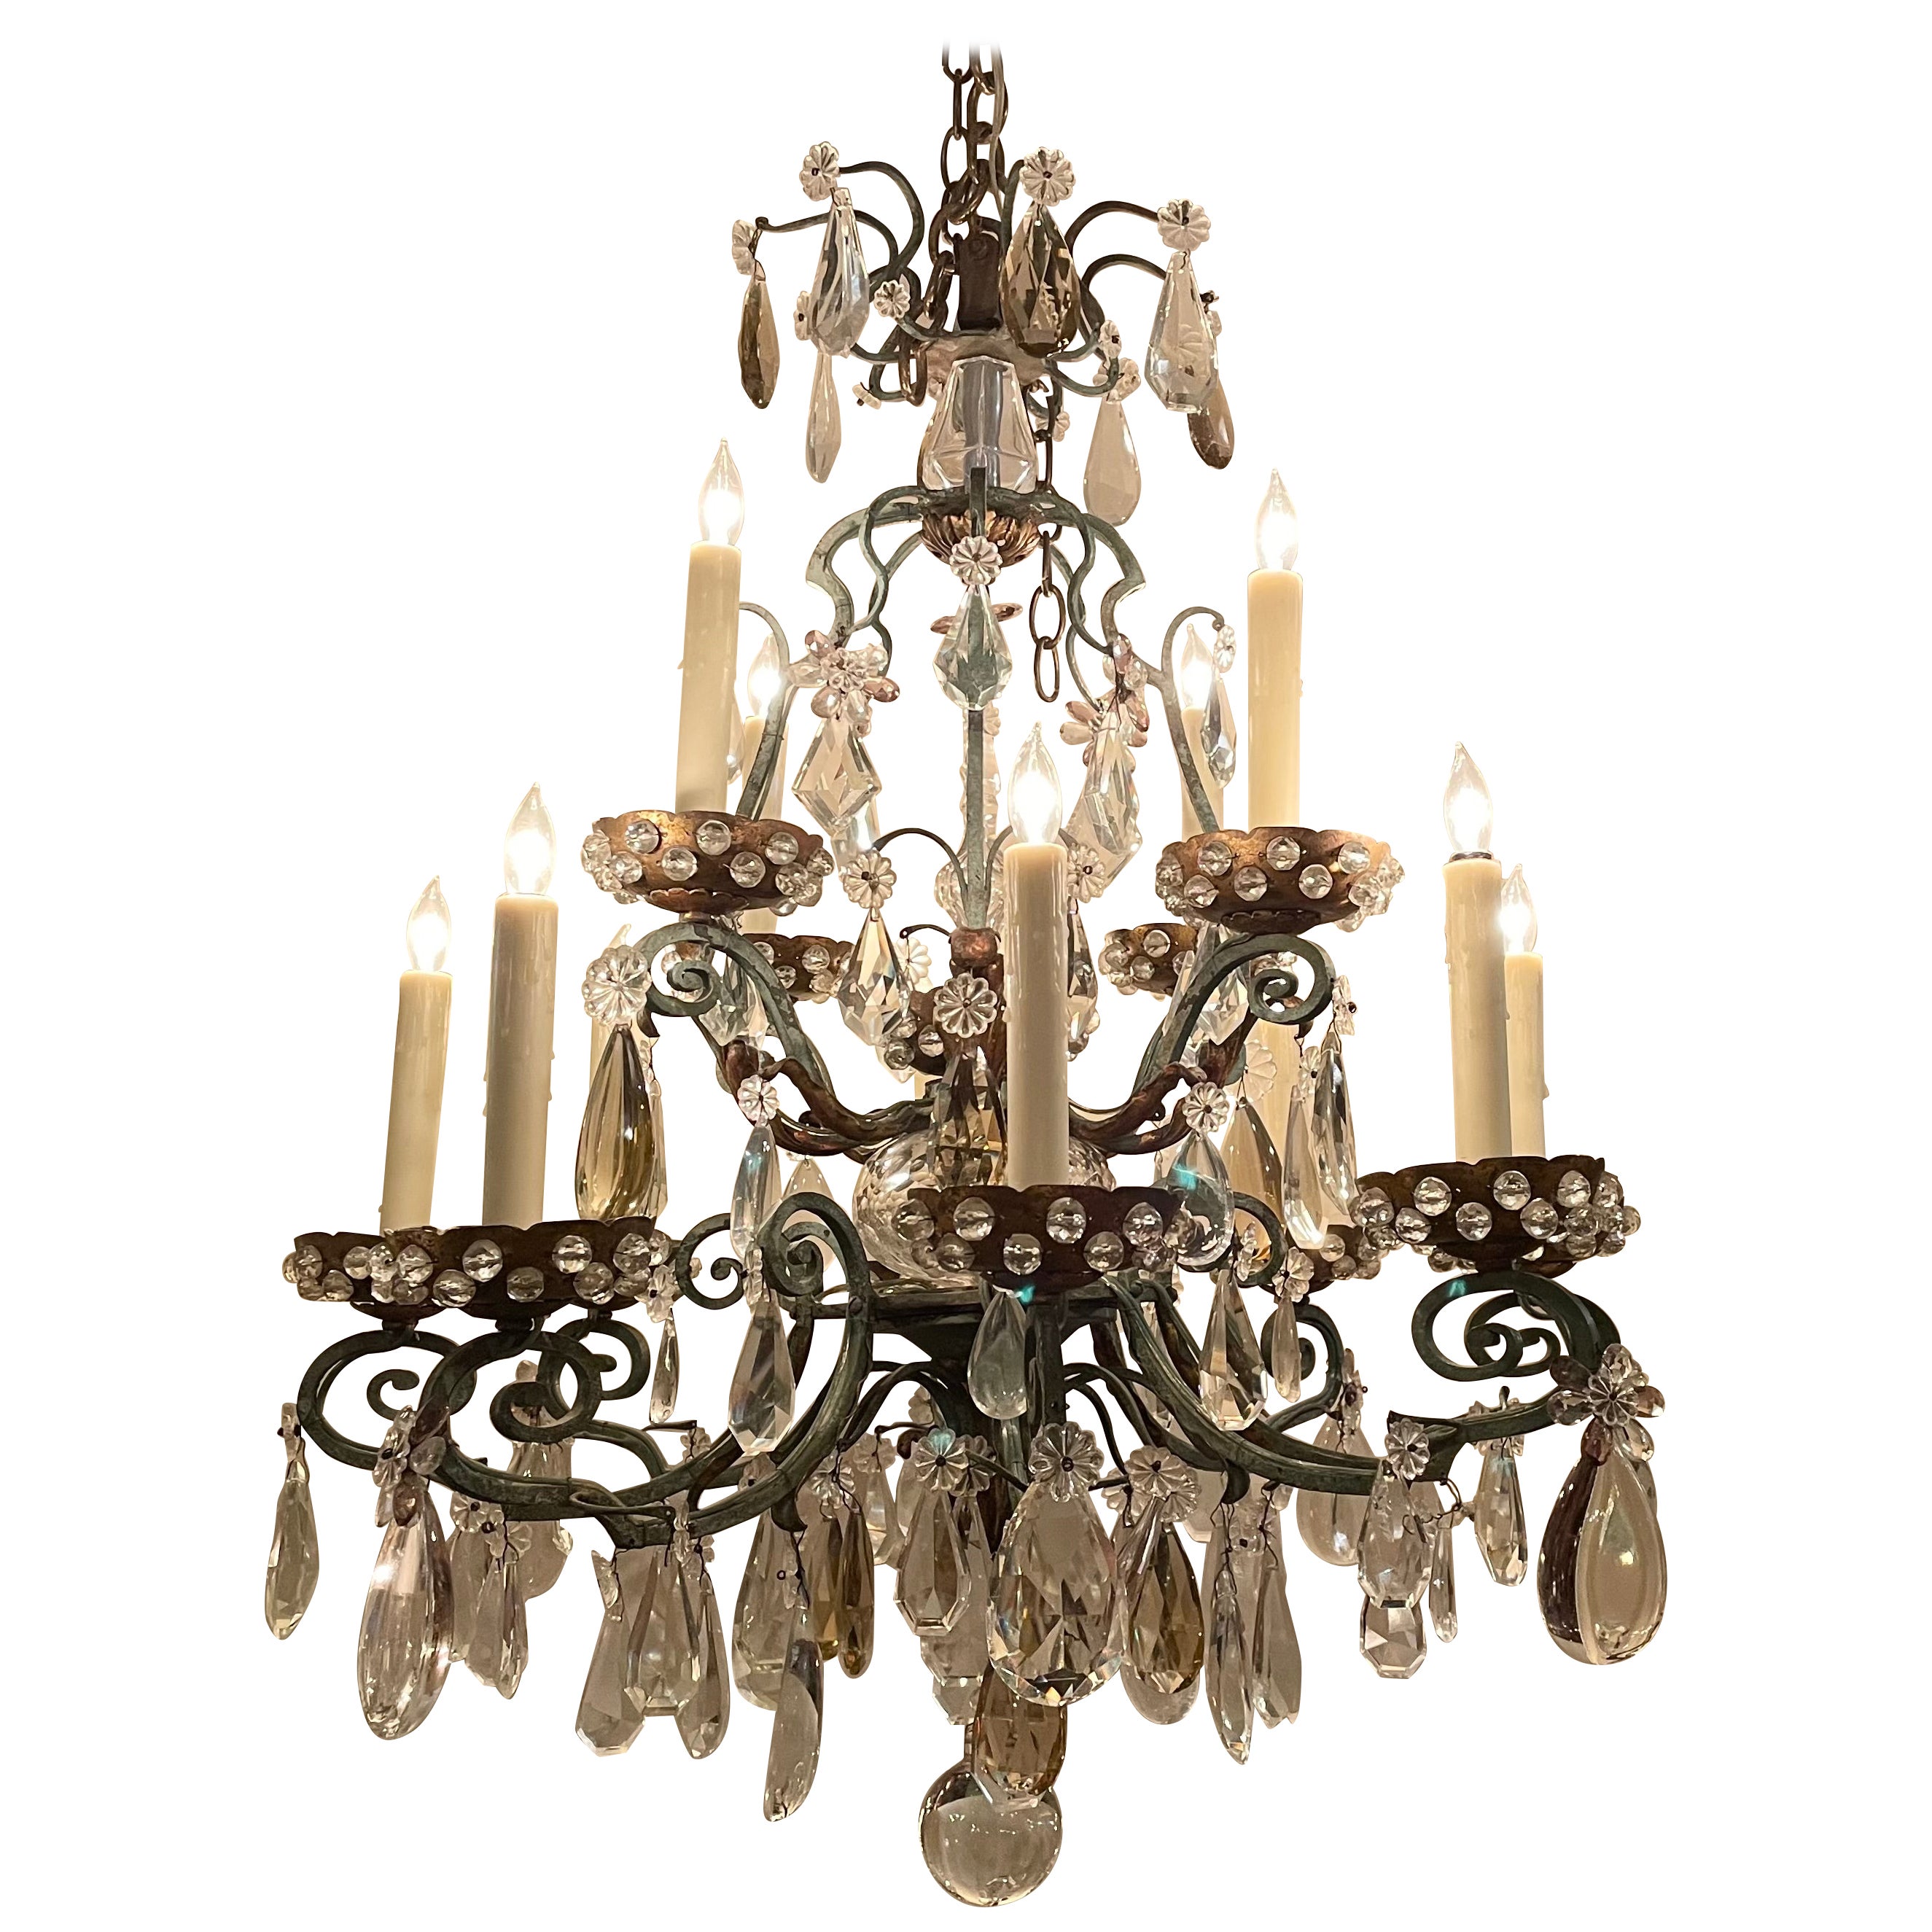 Antique French Wrought Iron & Crystal Chandelier circa 1900 For Sale